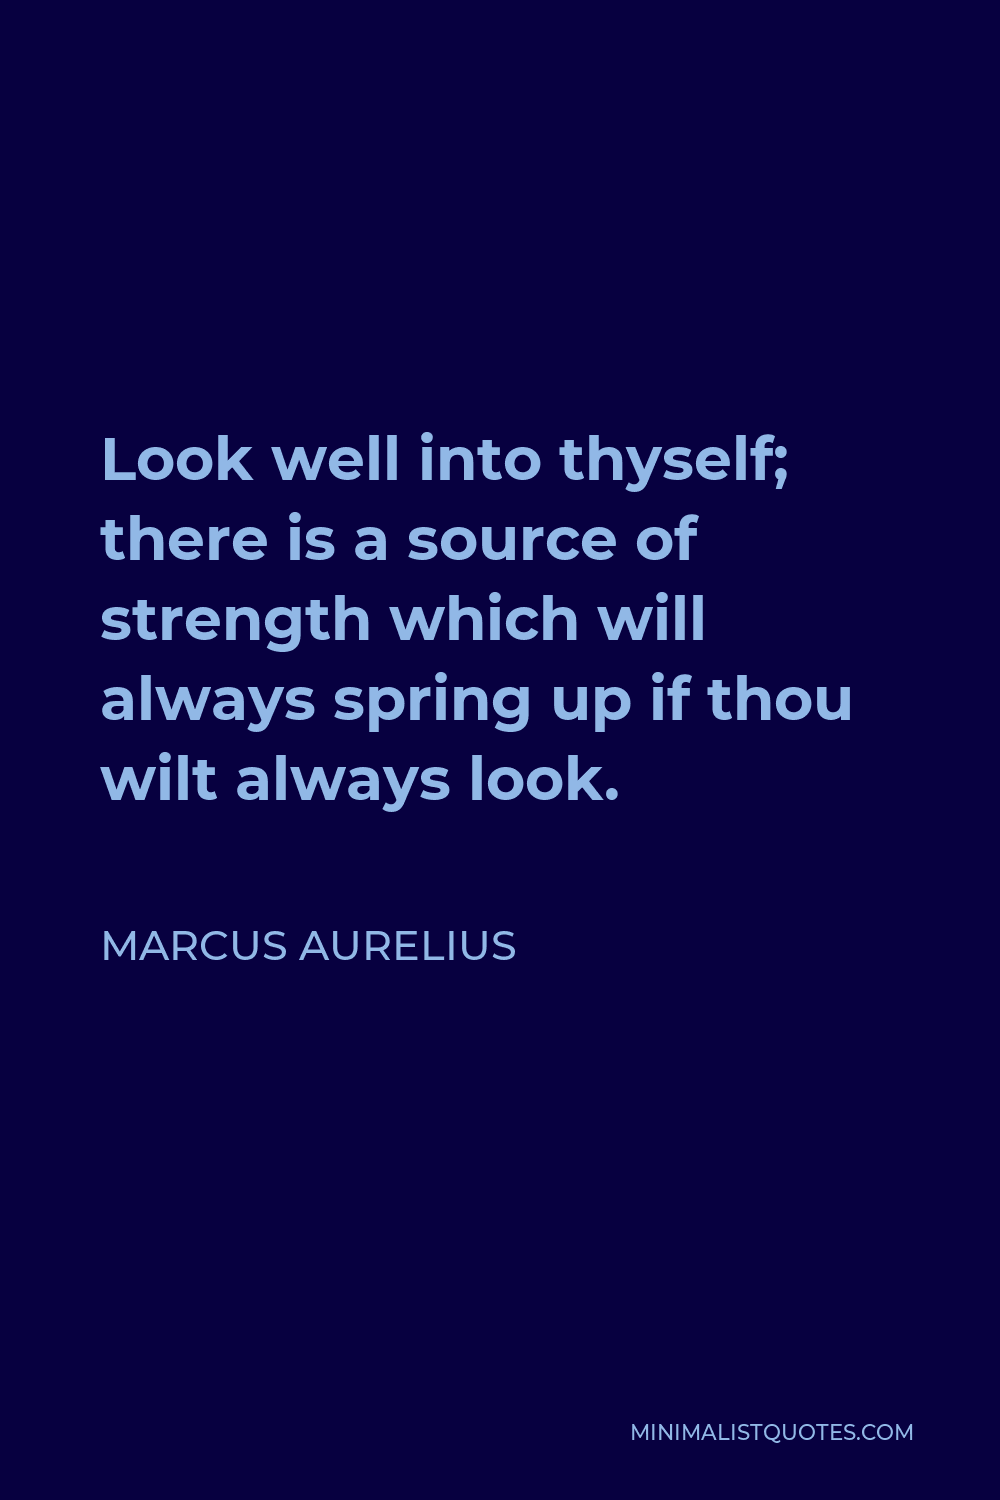 Marcus Aurelius Quote - Look well into thyself; there is a source of strength which will always spring up if thou wilt always look.